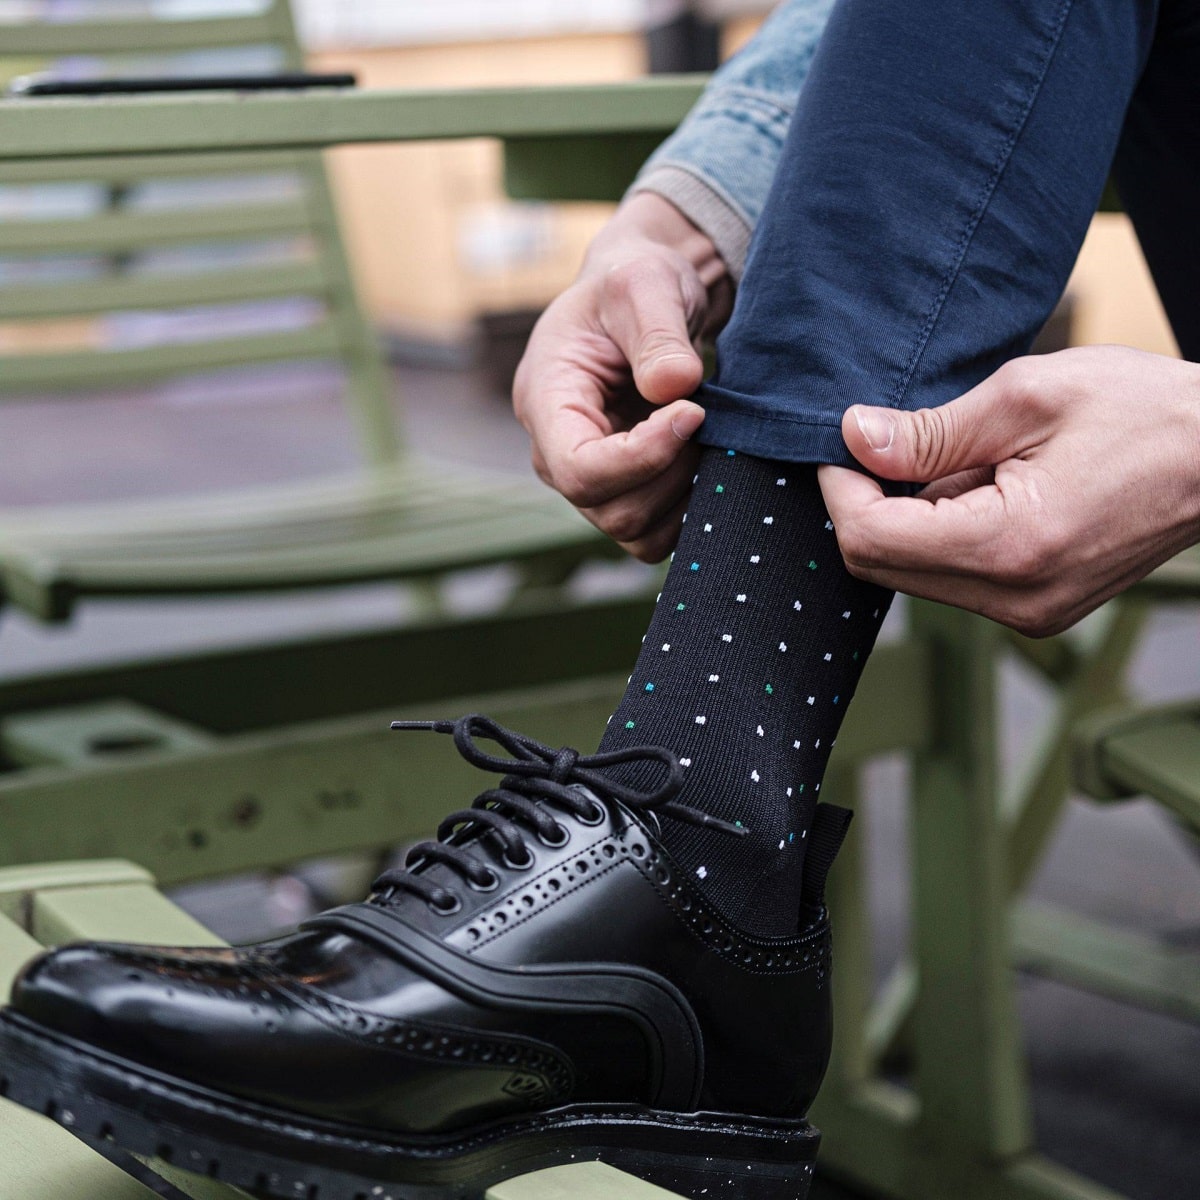 A Guide to Over the Calf Socks: Why and When to Use Them